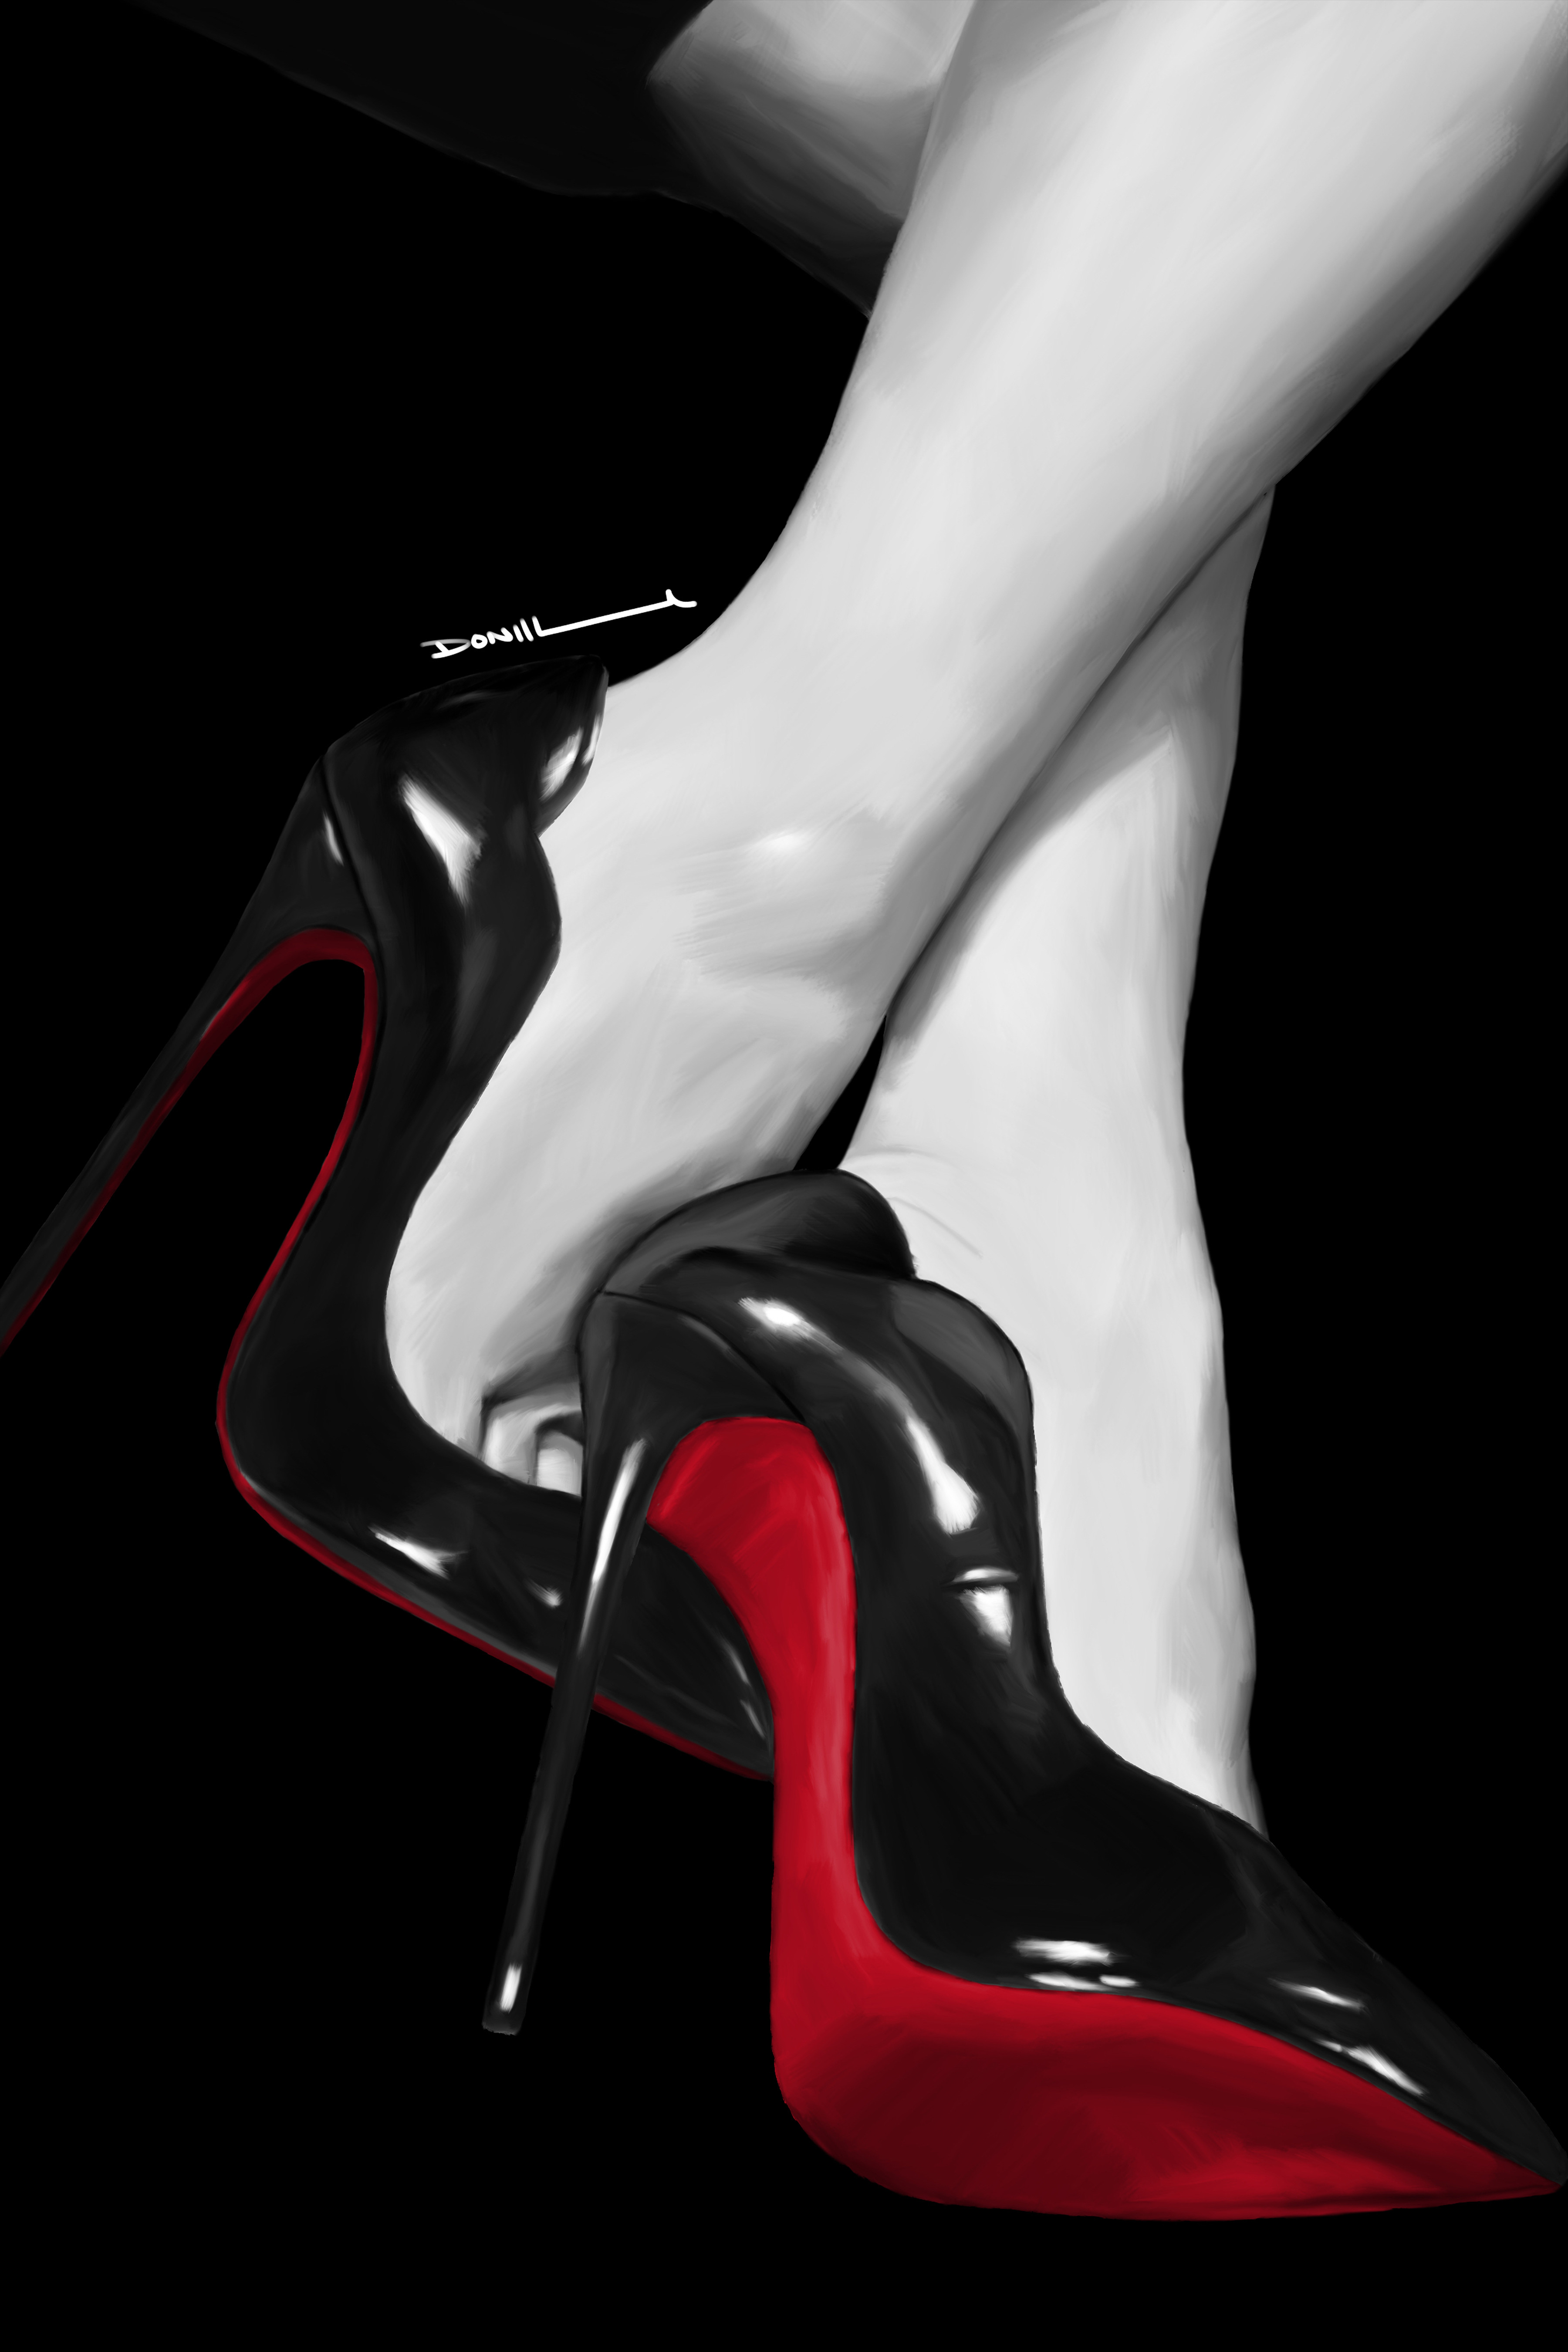 purchase this version here:
https://www.artstation.com/prints/art_poster/kjyO6/womens-red-and-black-high-heel-shoes-black-and-white-version